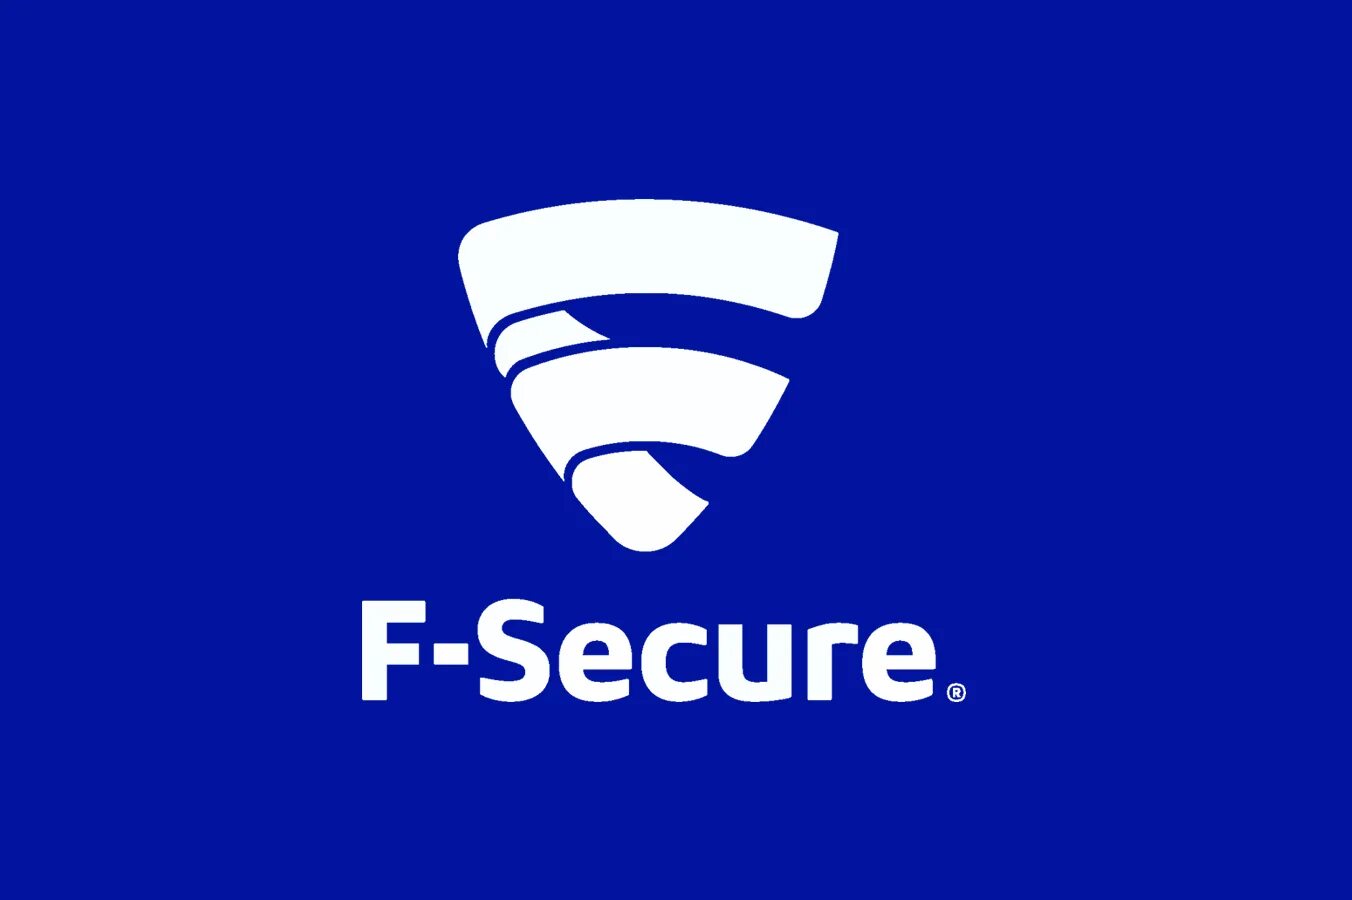 Safe and secure. F-secure антивирус. F secure логотип. F-secure Freedome VPN. Secure VPN лого.